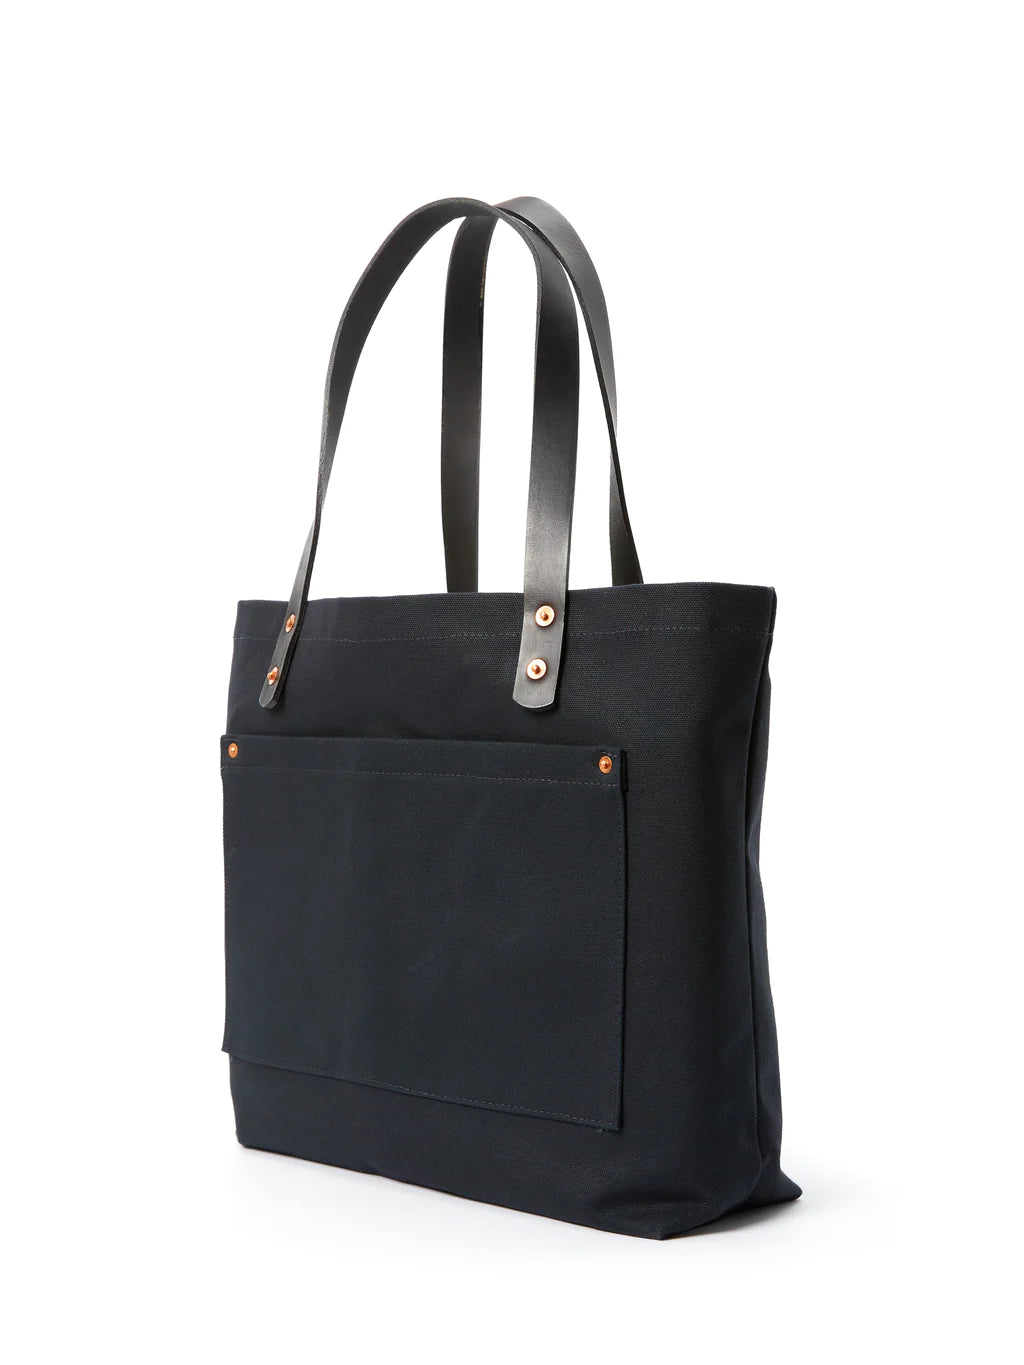 DAILY - Canvas Tote Bag